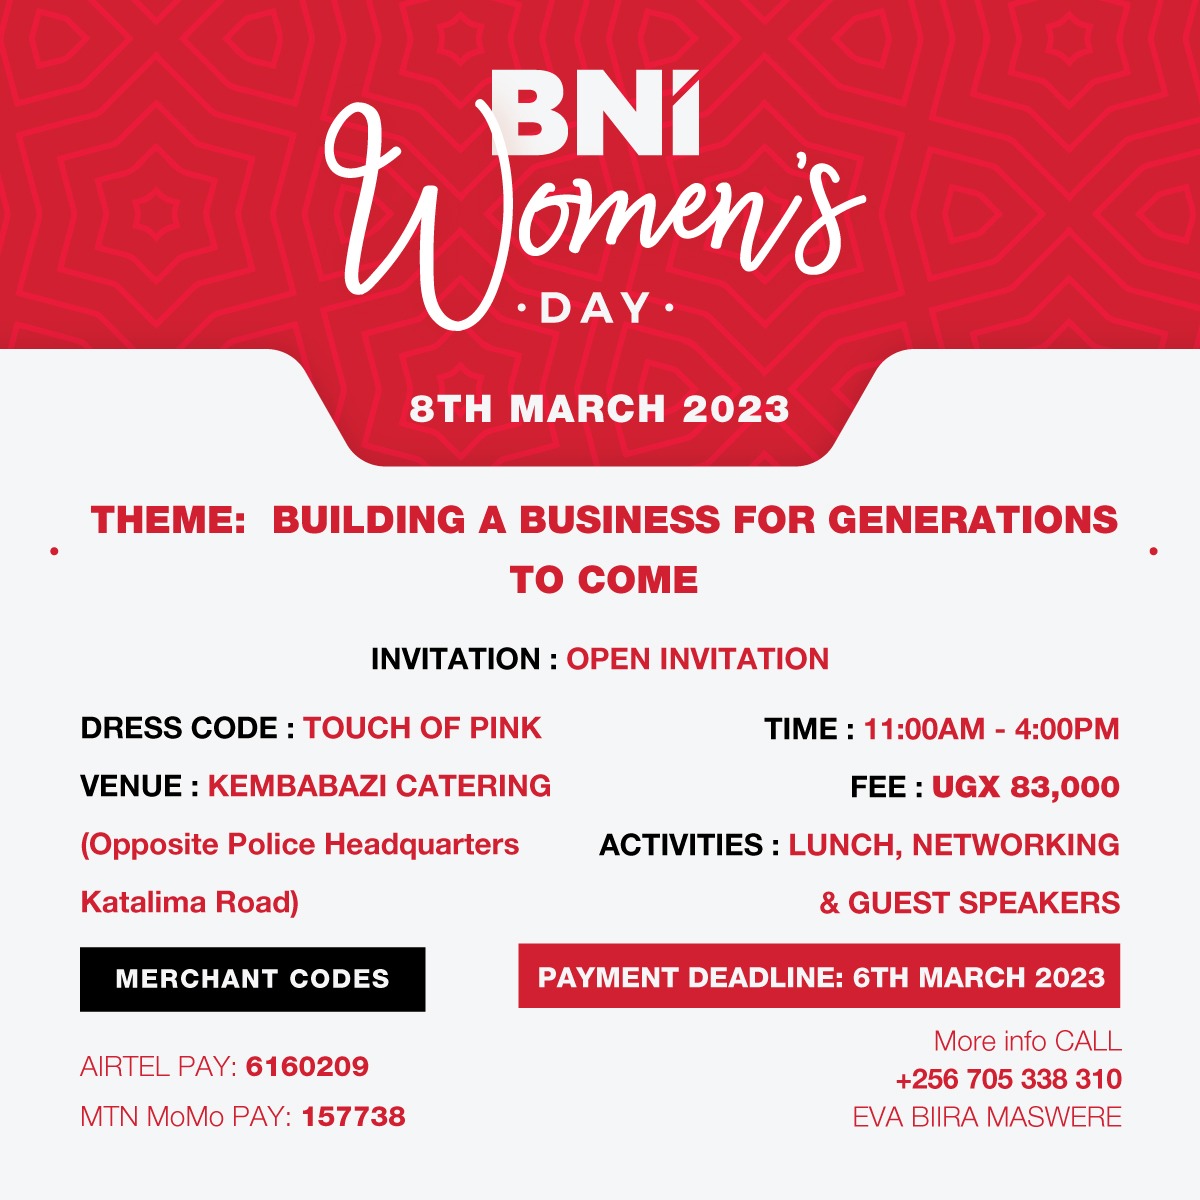 We are excited about the Women's day session. We shall host a lunch and networking session on 8th March 2023. You are invited to this session. @DNKibuuka